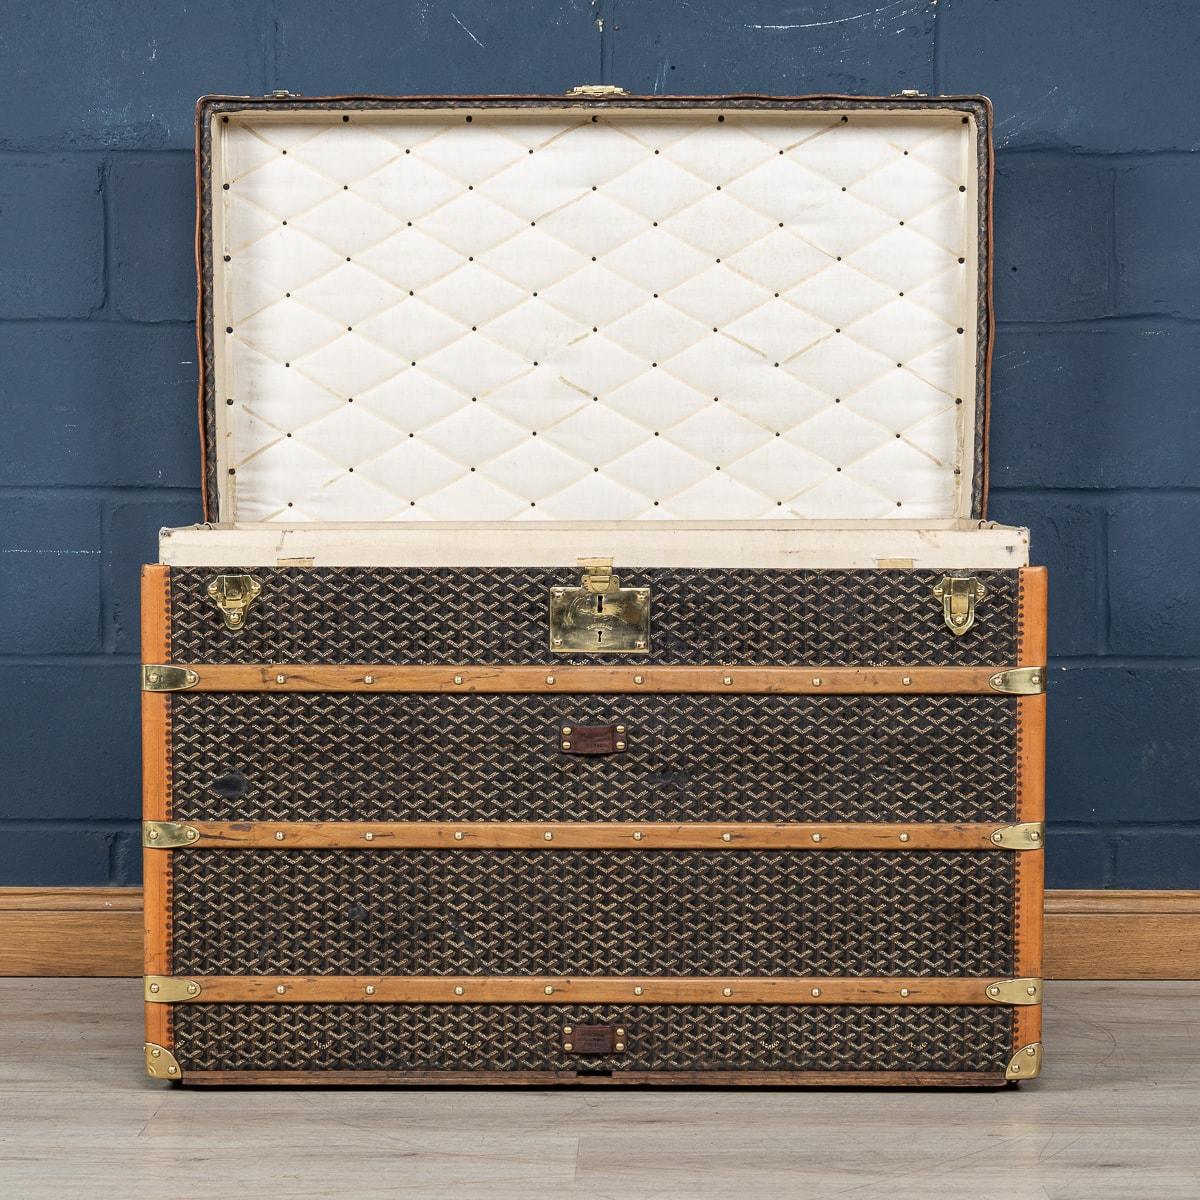 Early 20th Century Antique 20th Century Goyard Courier Trunk In Chevron Canvas, France c.1900 For Sale